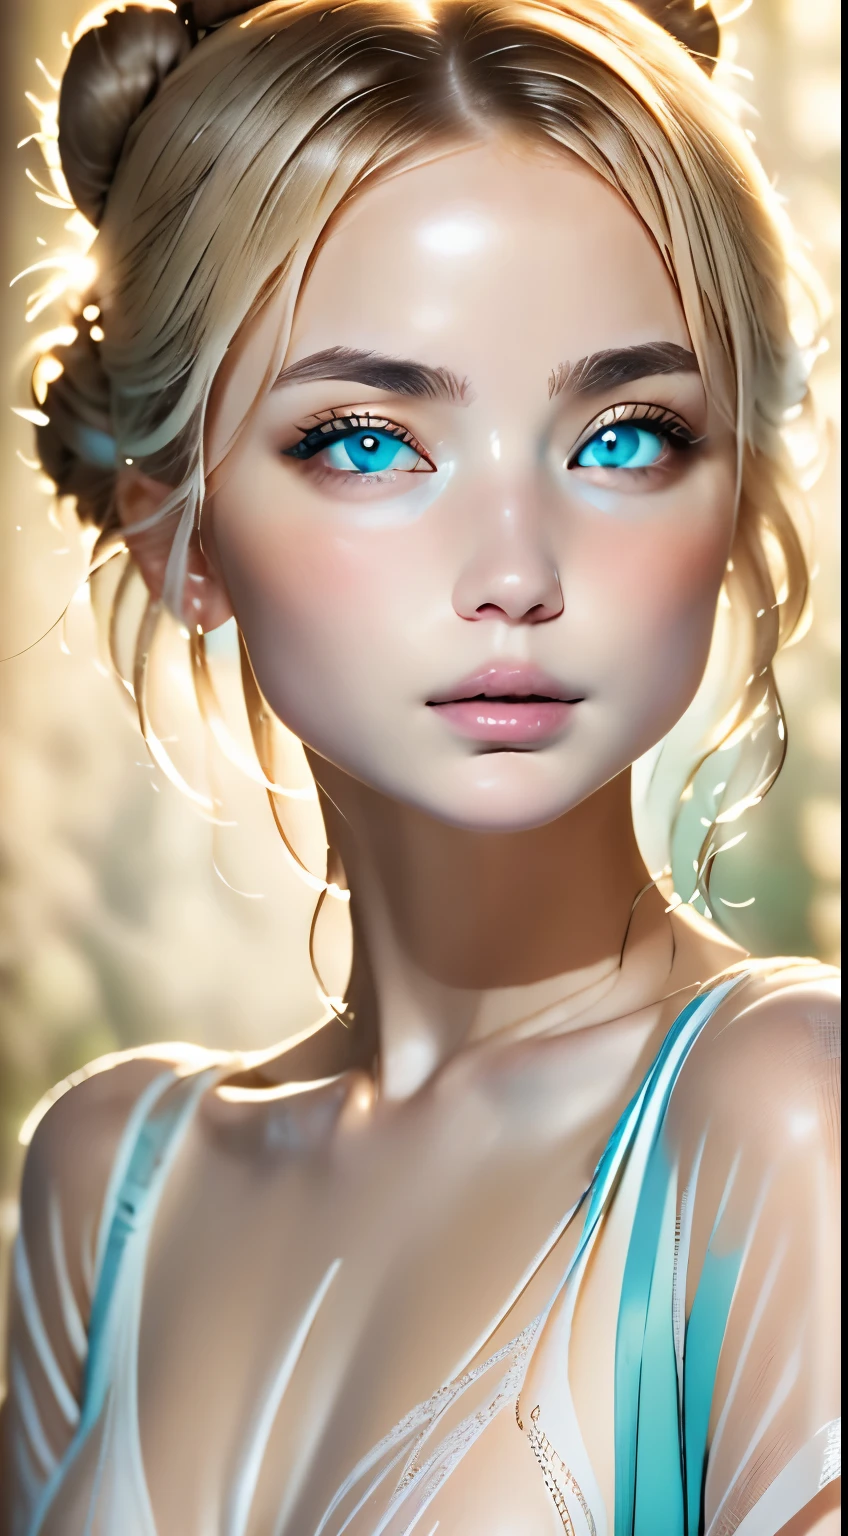 beautiful turquoise eyes、Perfect good looks、anatomy、２０talent、cute face、Beautiful Caucasian Woman、An ennui look、detailed face、very beautiful woman、Bewitching、silence、See-through feeling、White skin like porcelain、bun hair、ash blonde、plump lips、seductive lips、transparent processing、very realistic、RAW photo、highest quality、Highest image quality、master piece:1.3、Portrait、Natural light、perfect lighting、professional photographer